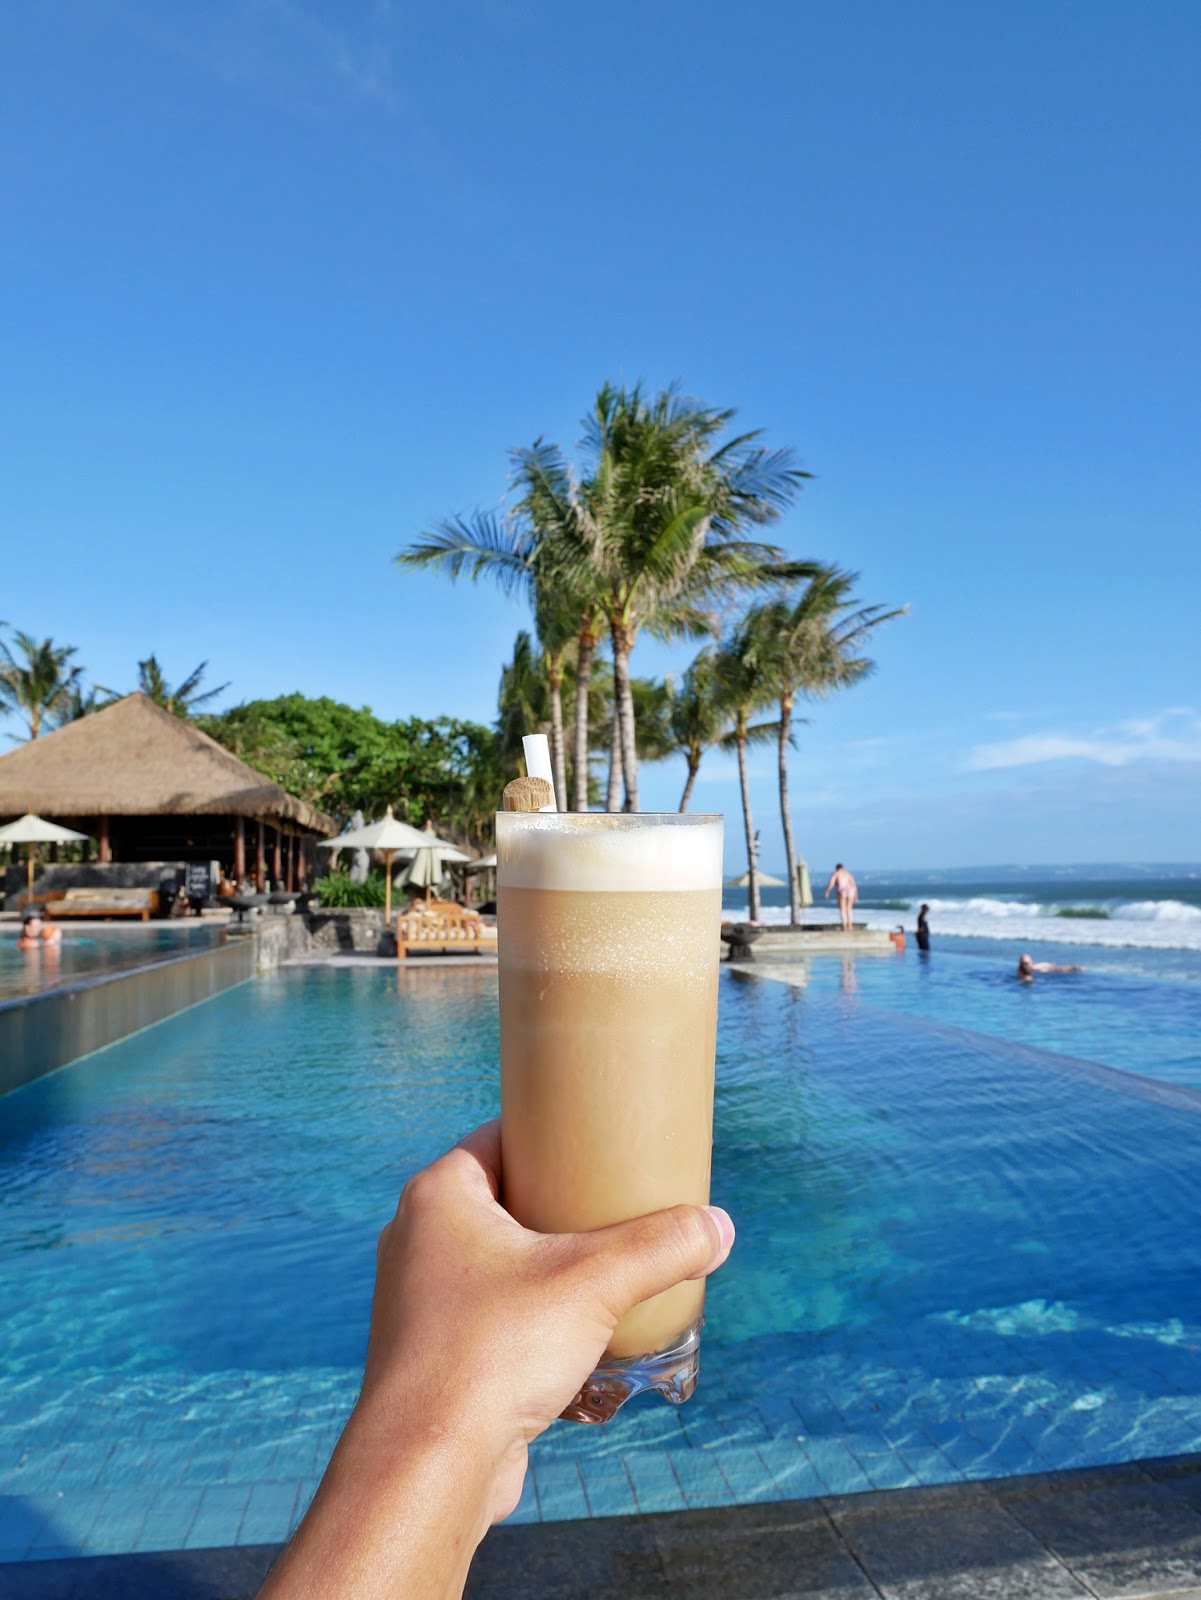 EAT & CHILL IN LUXURY AT THE LEGIAN BALI